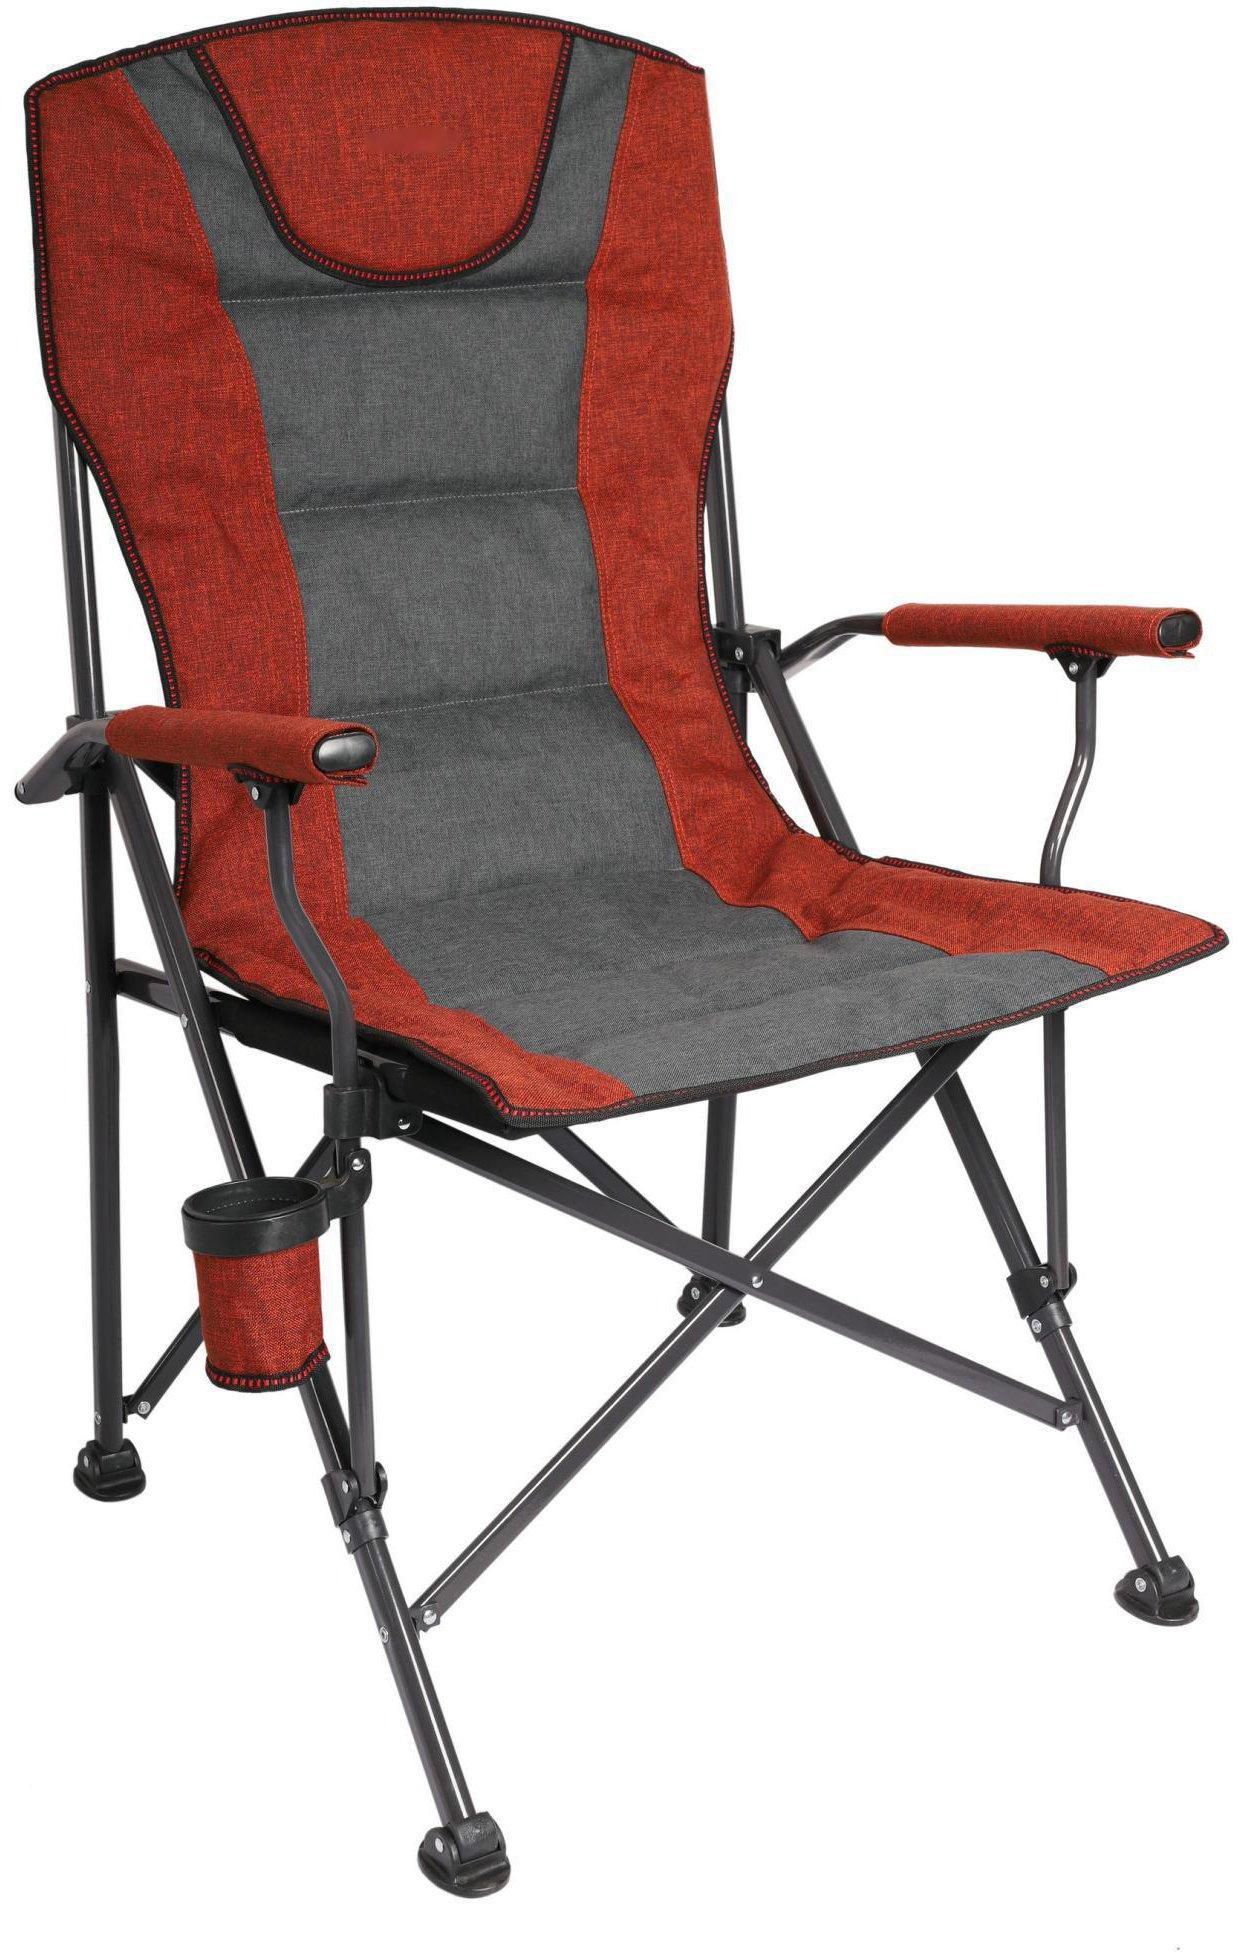 Homez, Foldable beach chair with bottle holder, Red and black